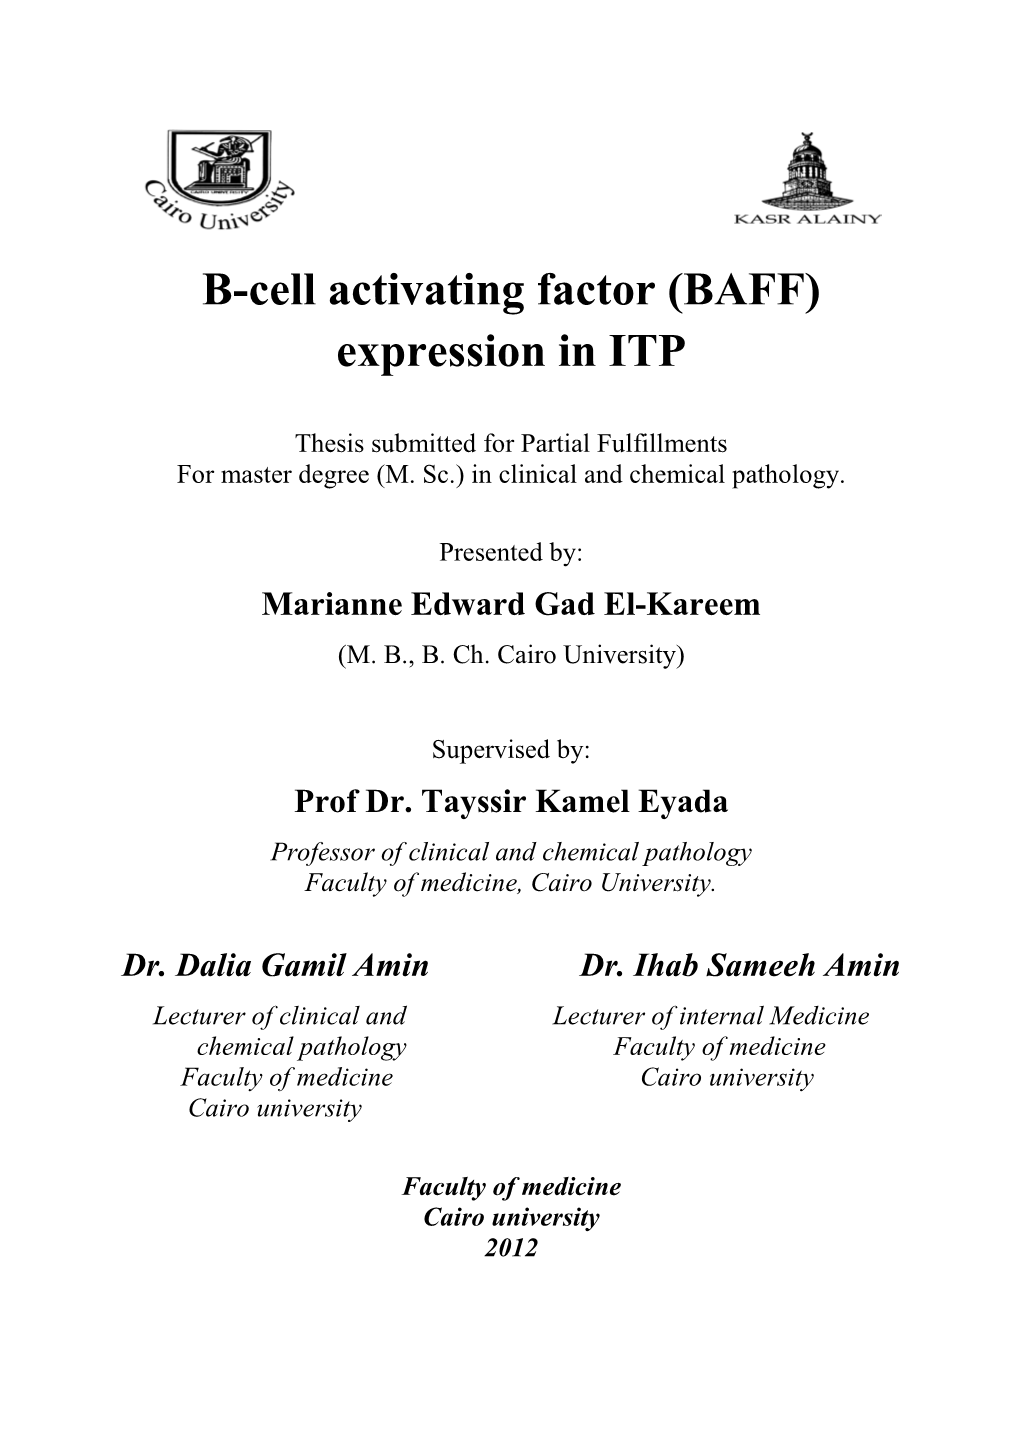 B-Cell Activating Factor (BAFF) Expression in ITP